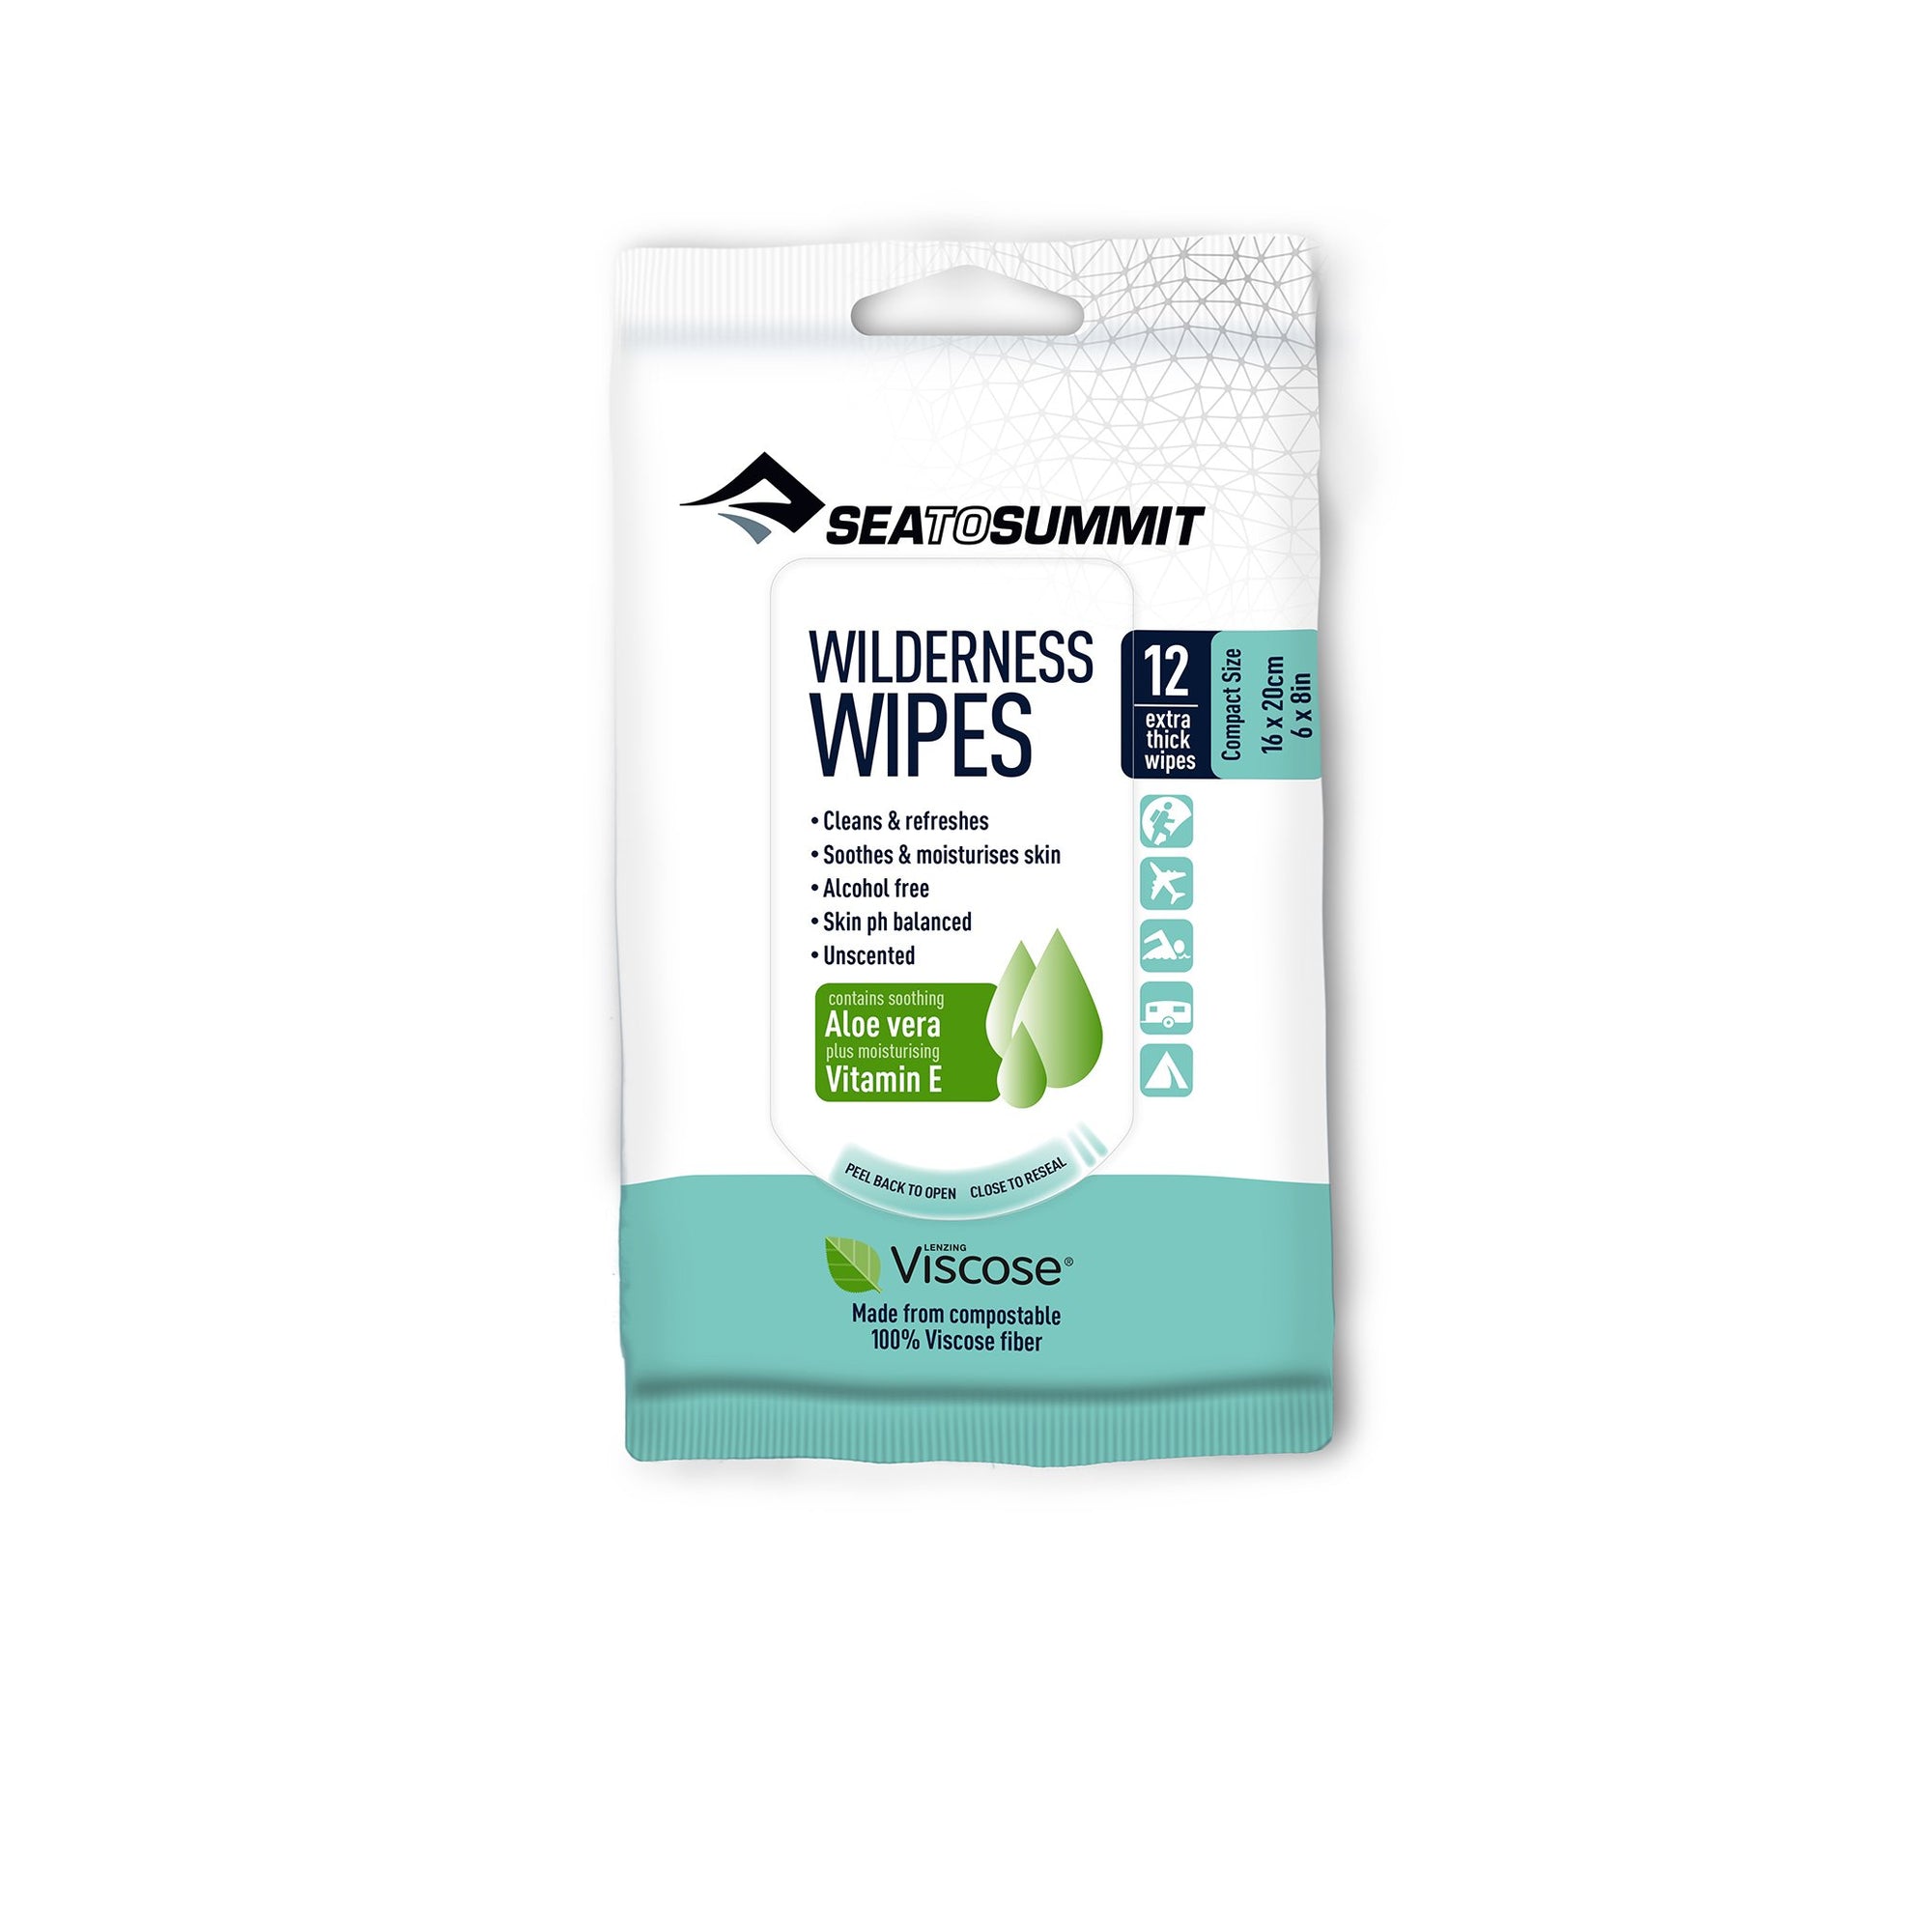 Sea to Summit Wilderness Wipes - Compact 12 Pack